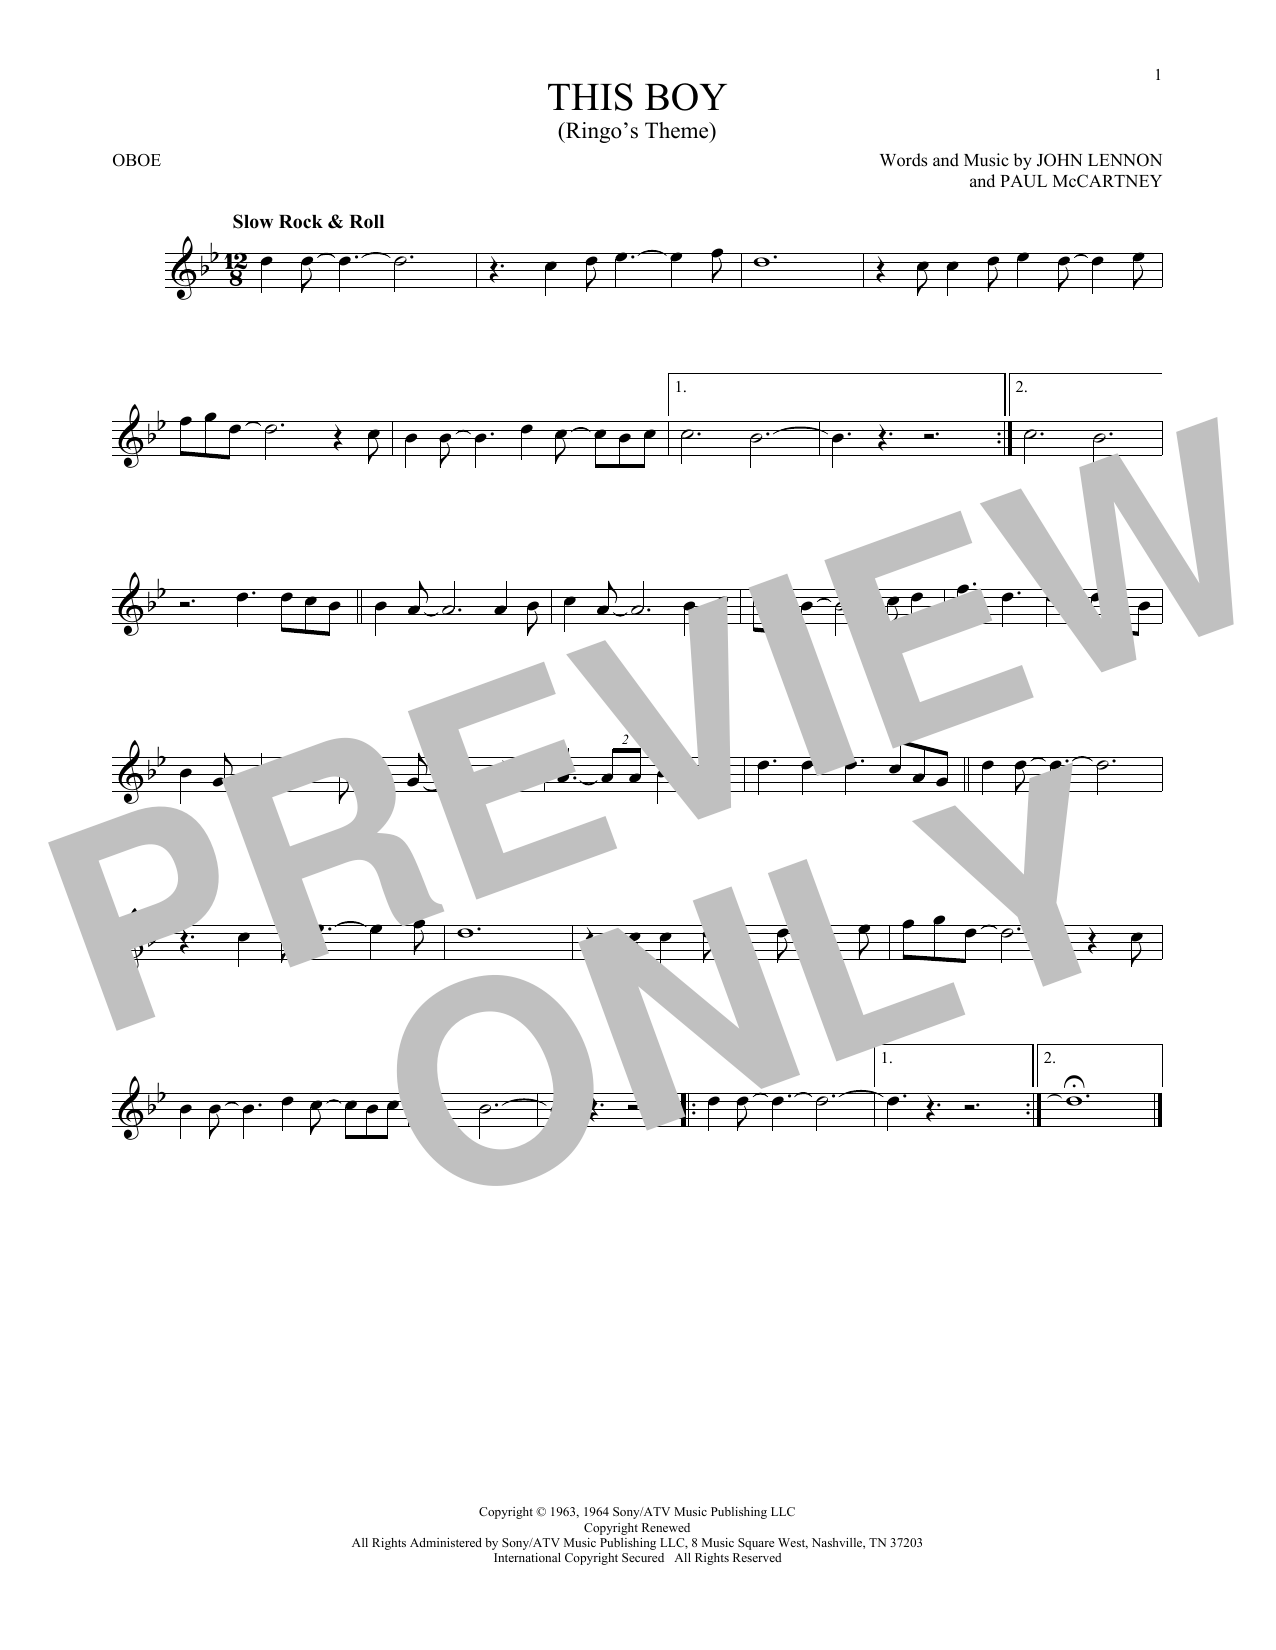 Download The Beatles This Boy (Ringo's Theme) Sheet Music